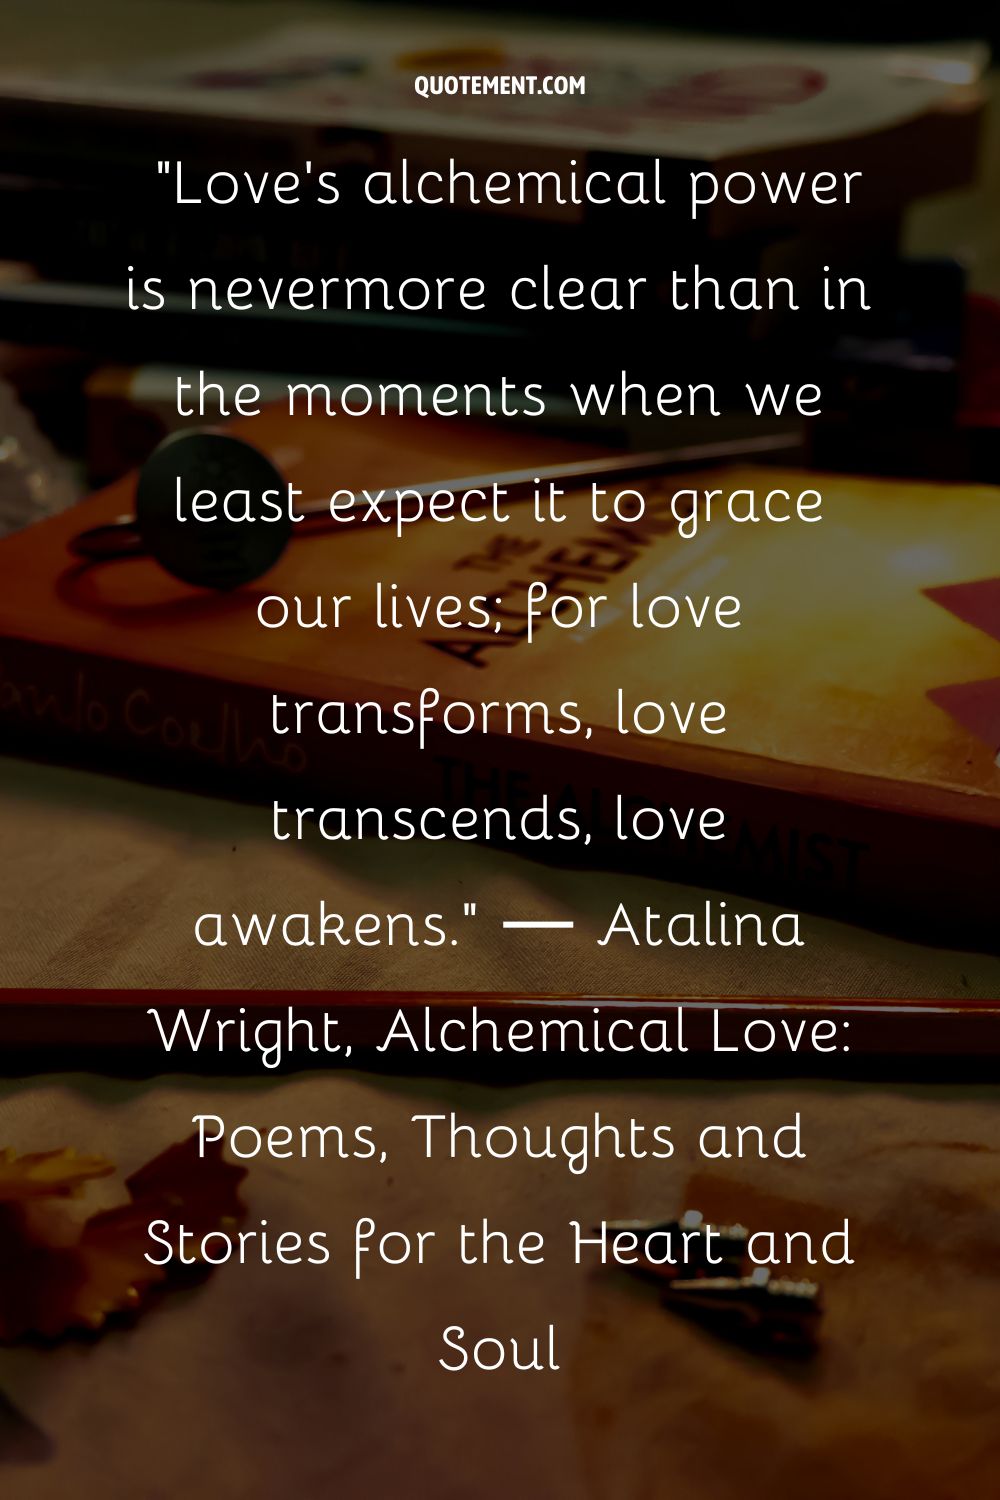 Love's alchemical power is nevermore clear than in the moments when we least expect it to grace our lives; for love transforms, love transcends, love awakens